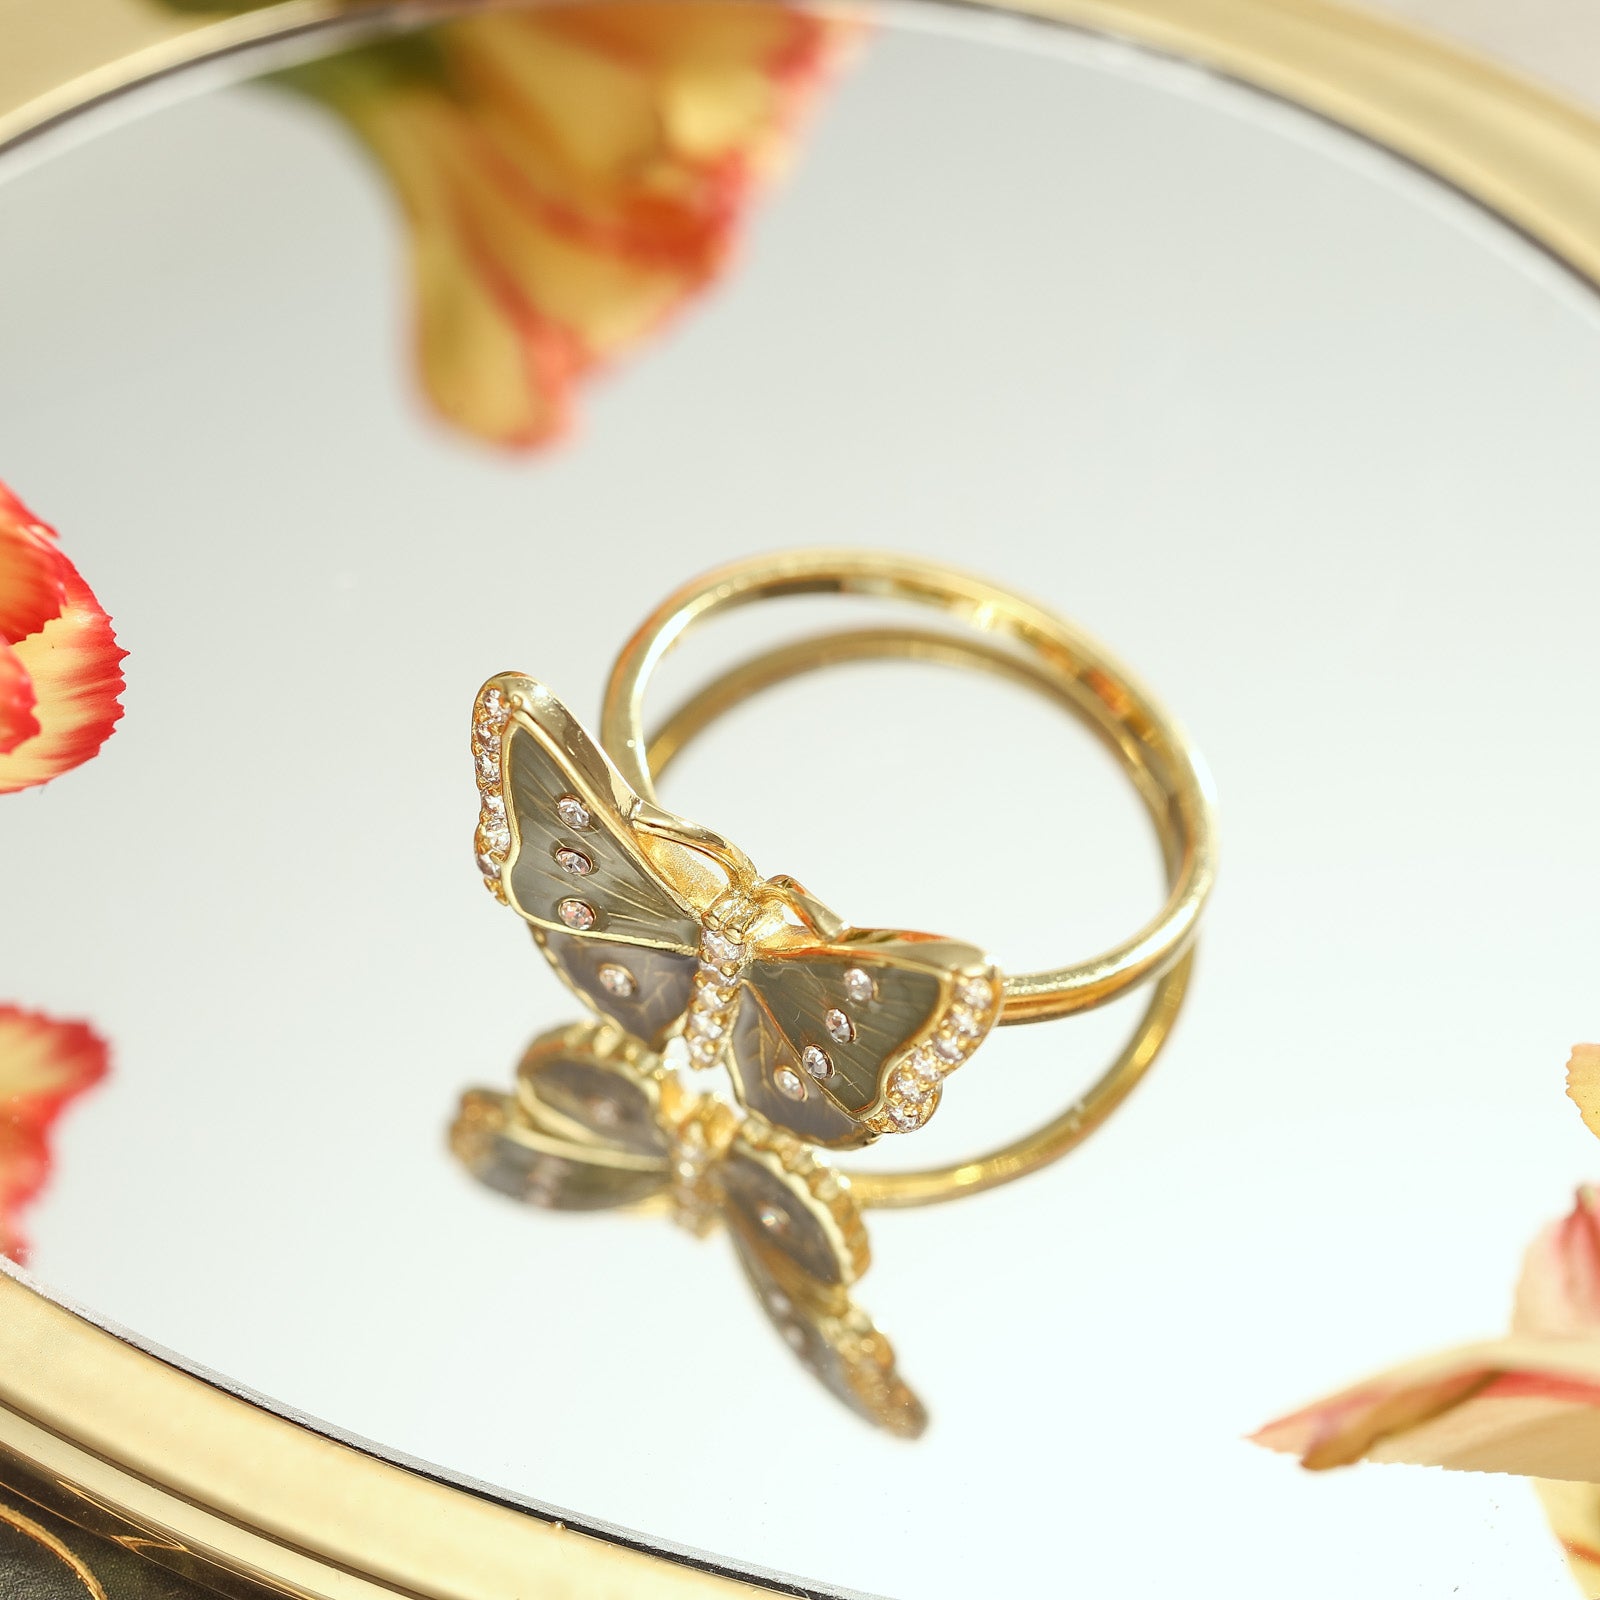 butterfly engagement ring